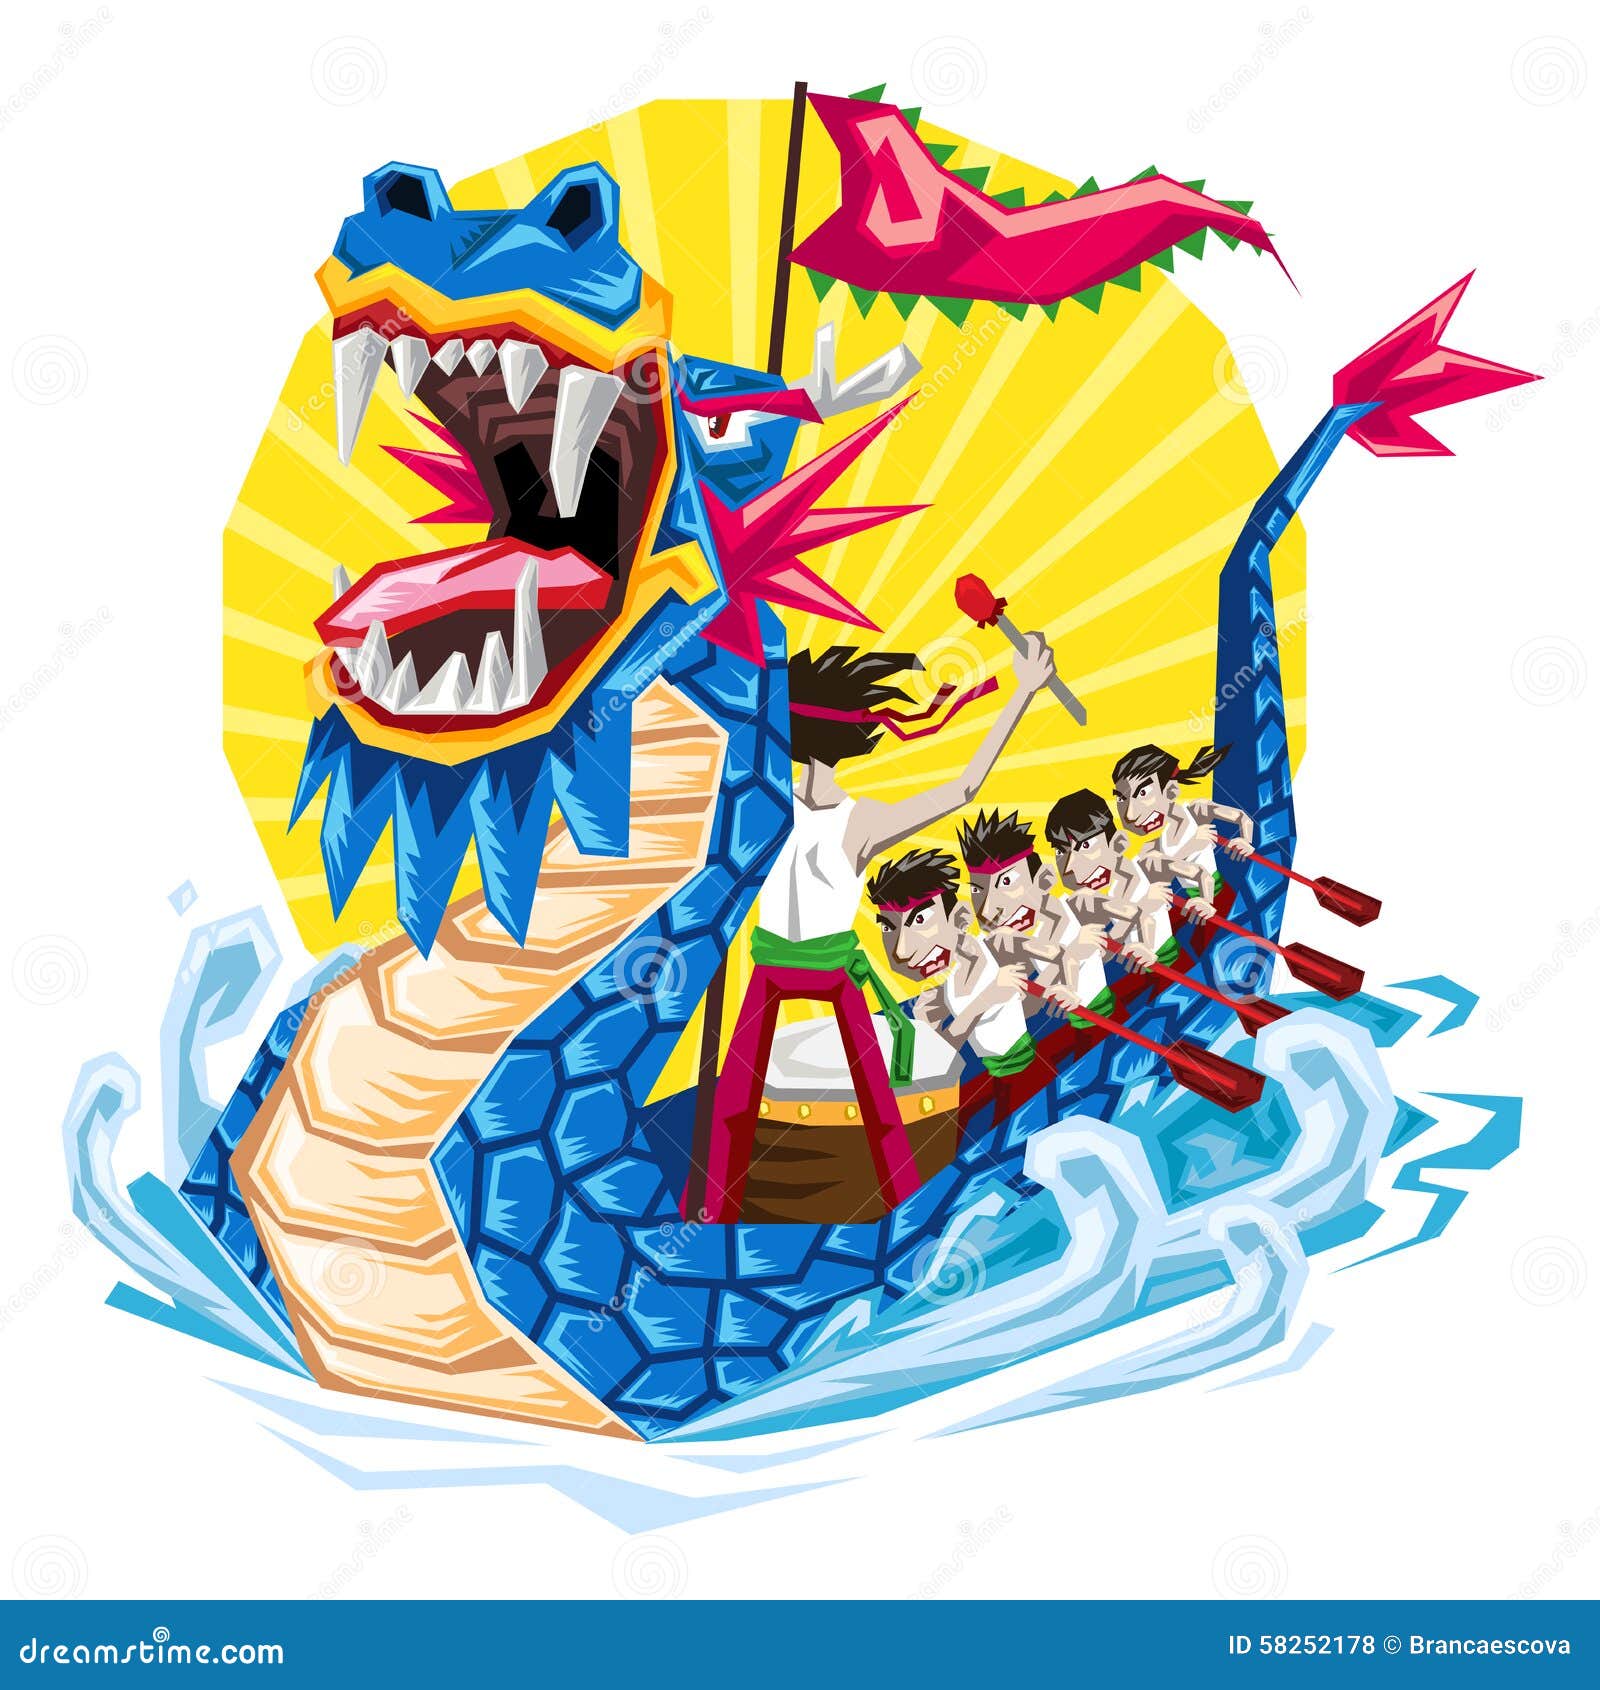 boat racing clipart - photo #50